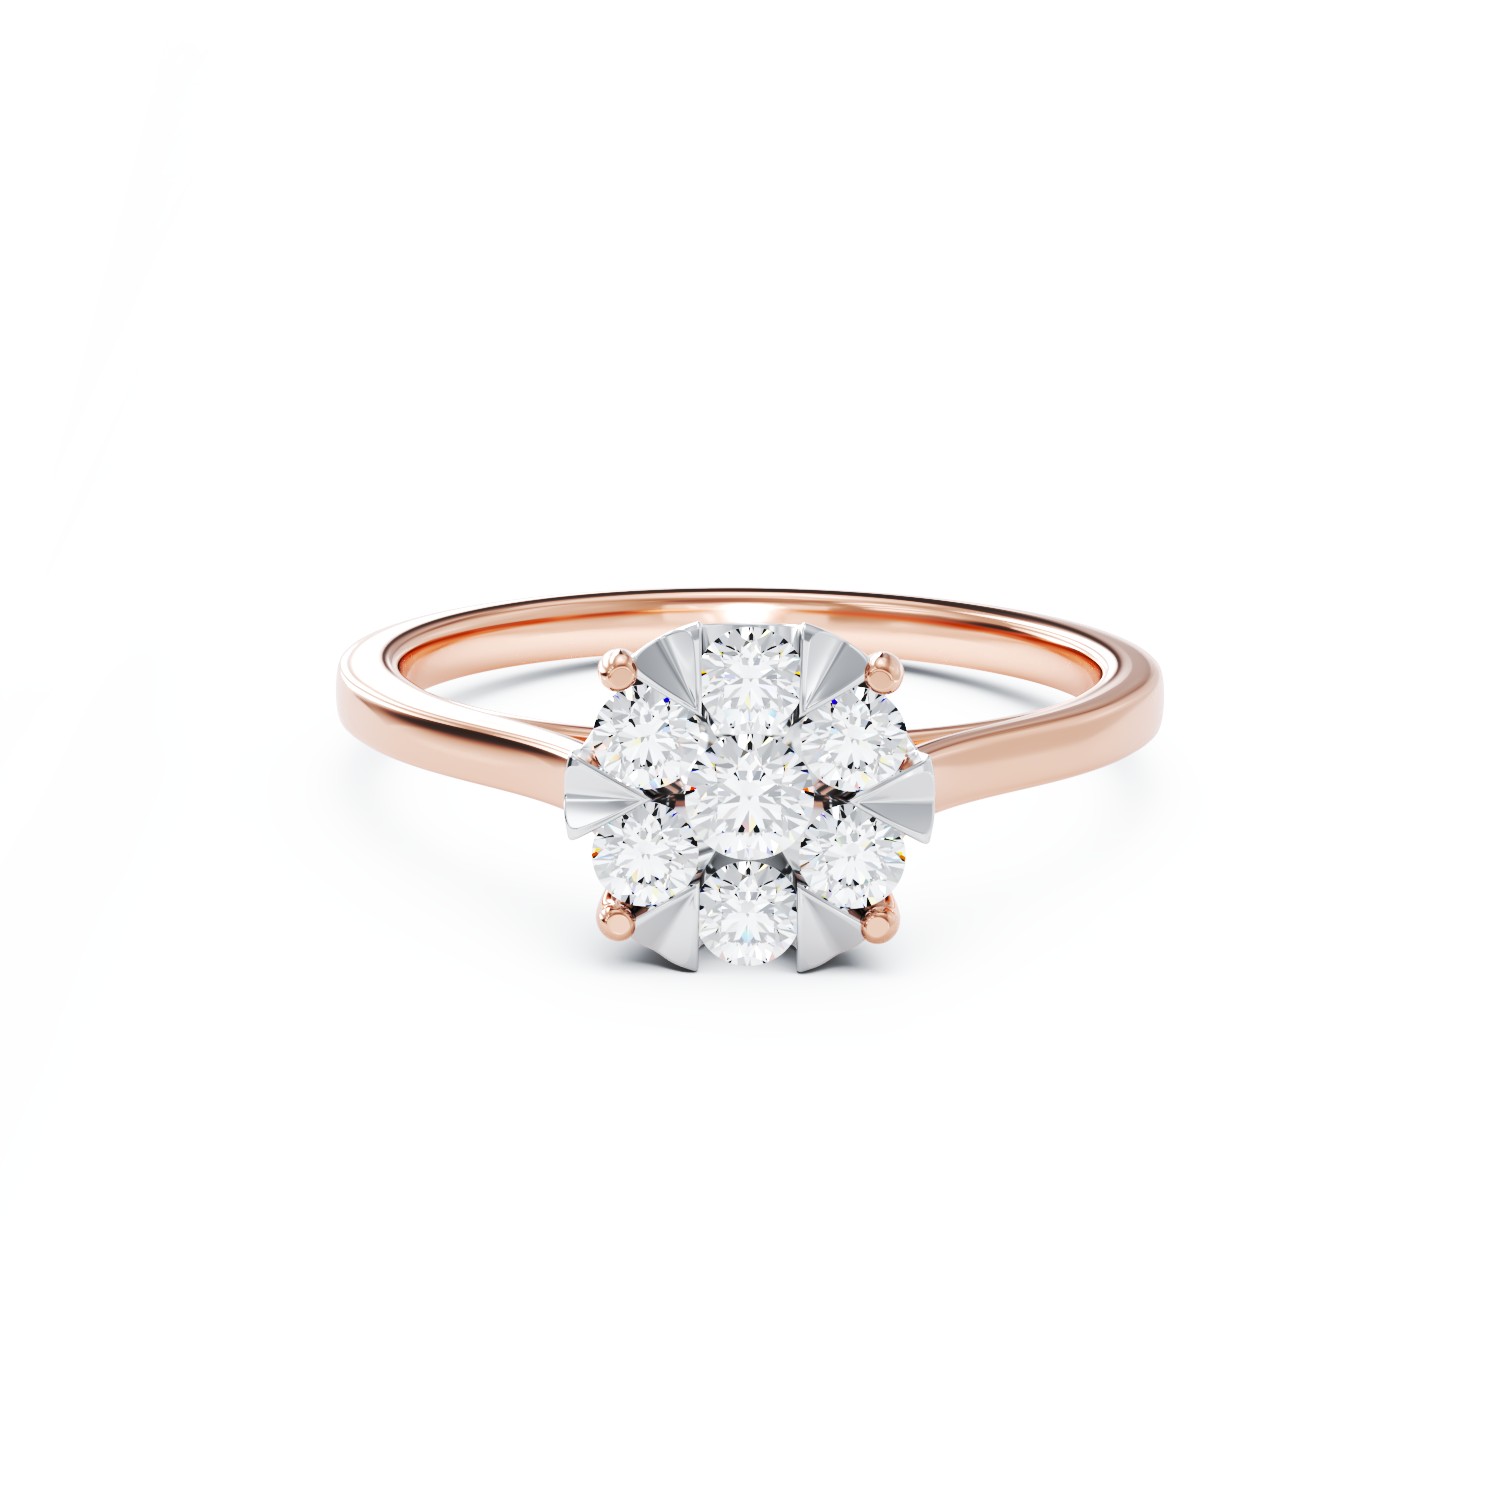 Rose gold engagement ring with 0.253ct diamonds